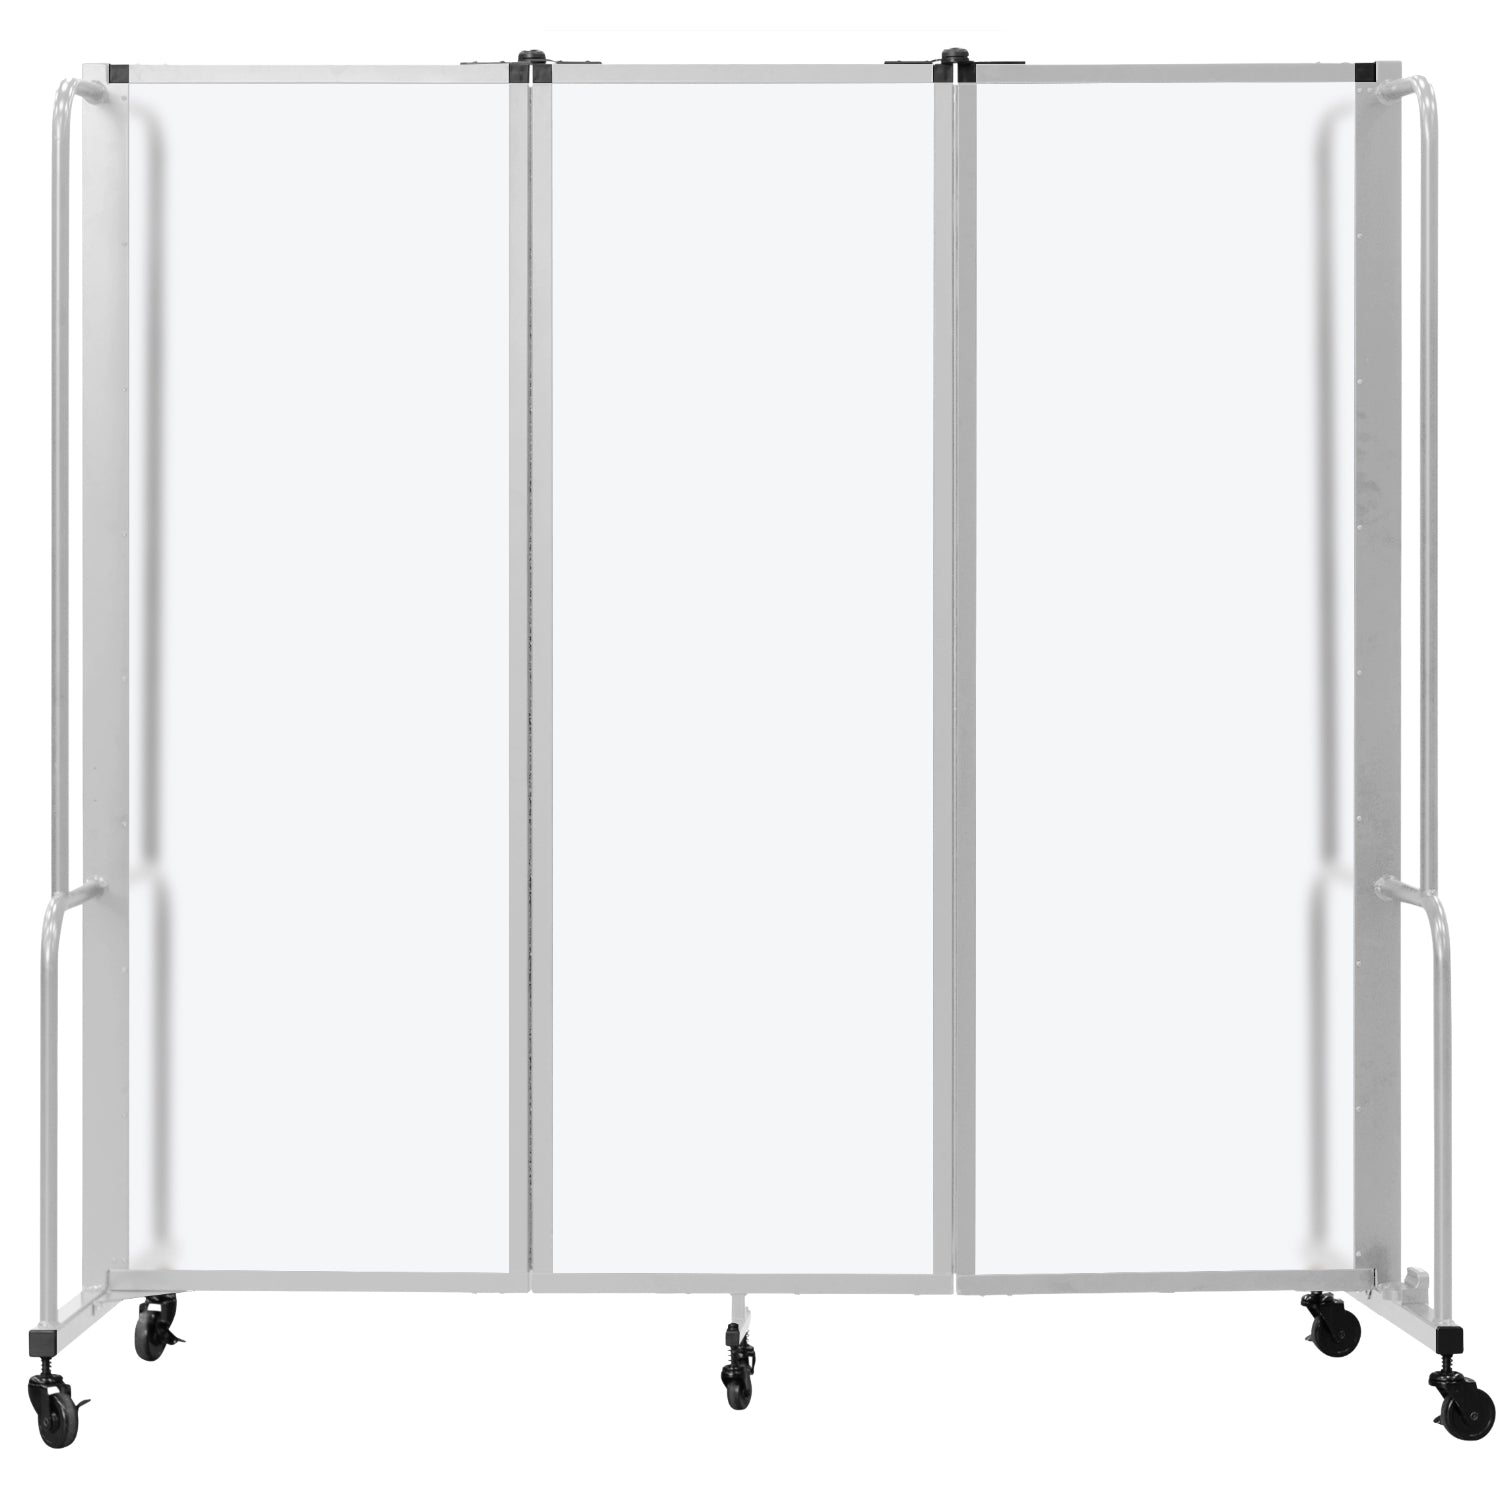 Robo Frosted Acrylic Room Divider with Grey Frame, 6' Height, 3 Sections